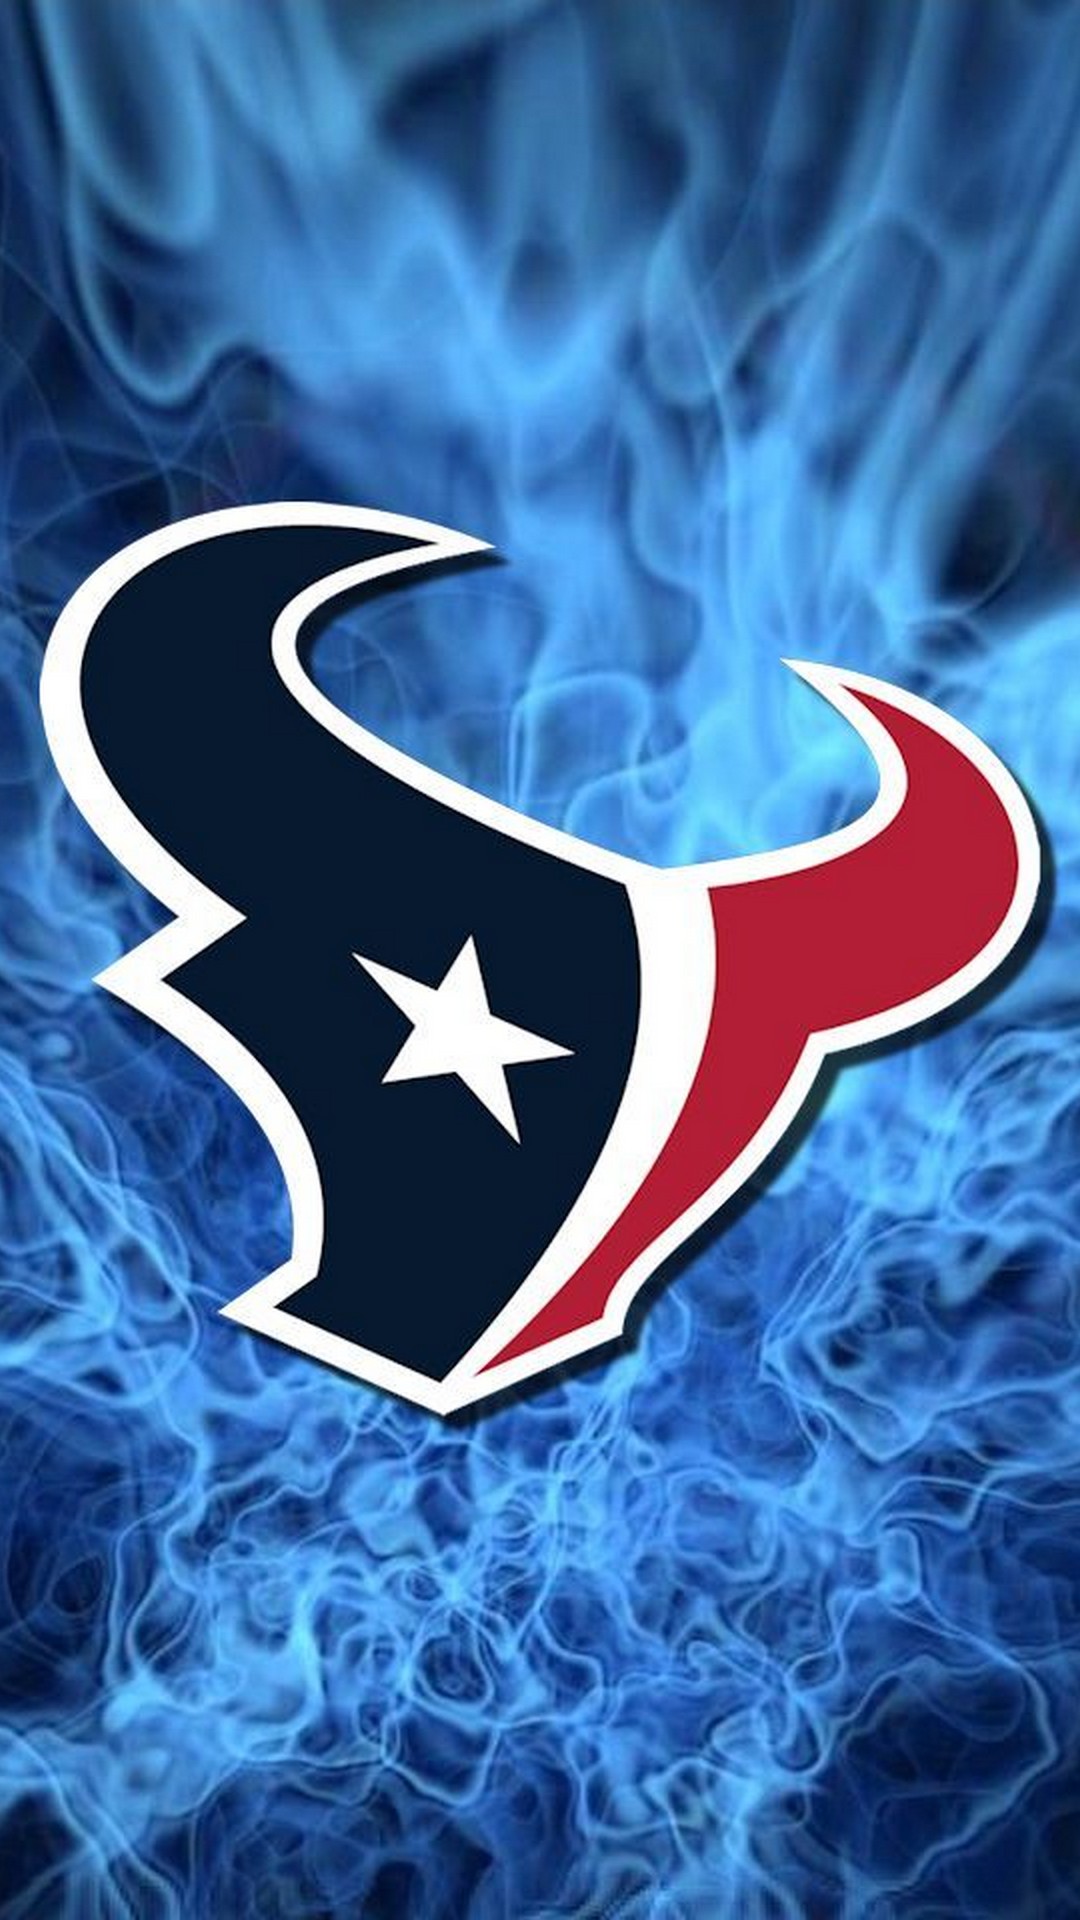 Texans iPhone Wallpaper HD with high-resolution 1080x1920 pixel. Download and set as wallpaper for Apple iPhone X, XS Max, XR, 8, 7, 6, SE, iPad, Android